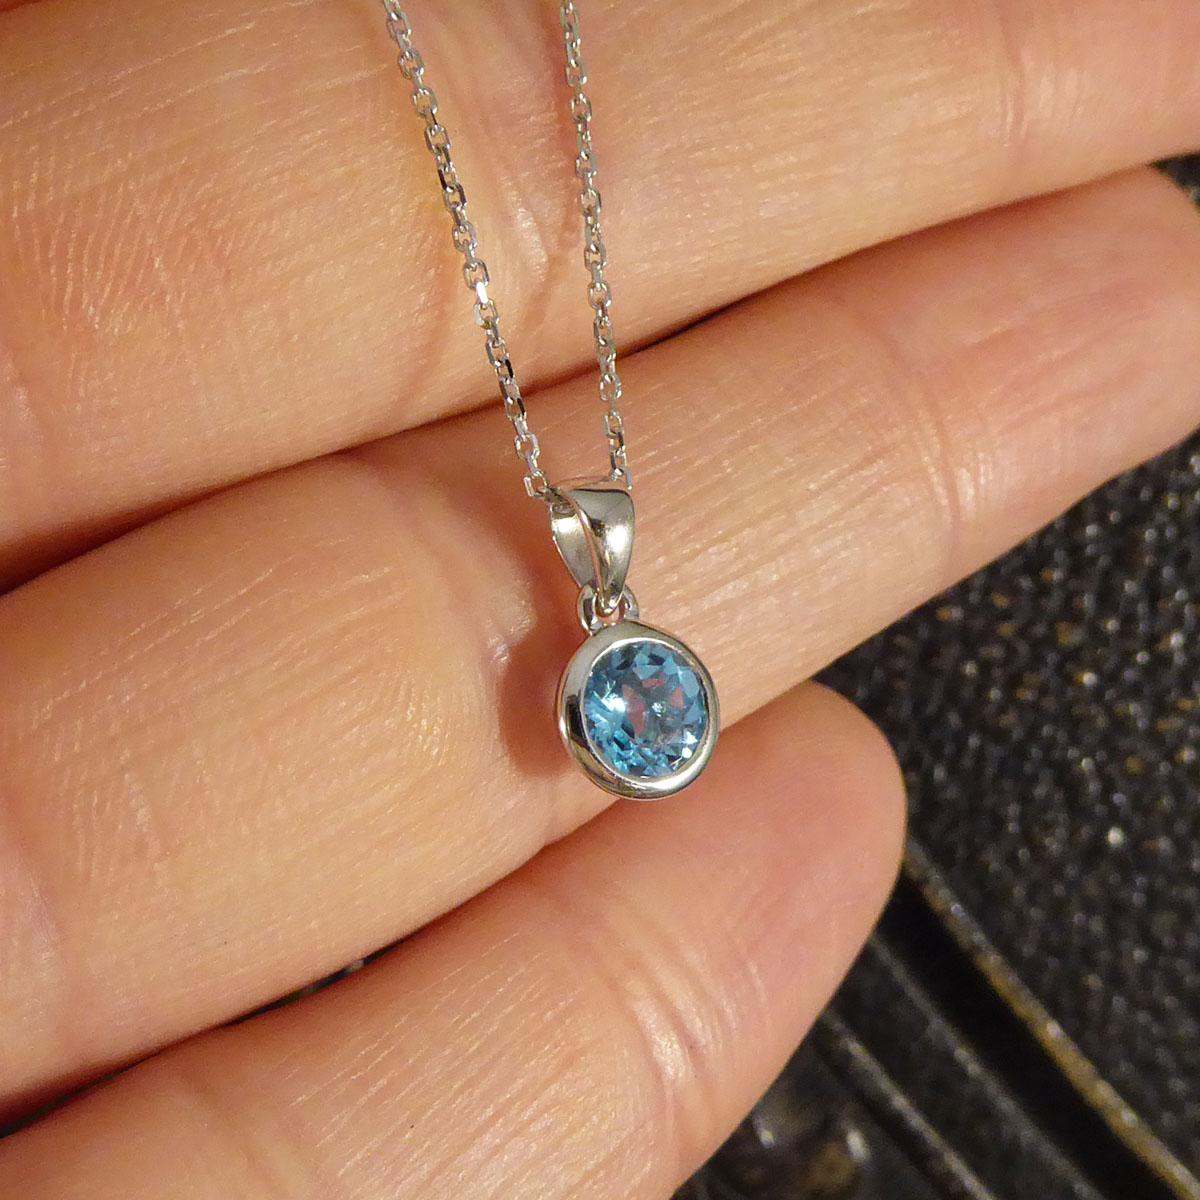 Hanging on a Contemporary 9ct White Gold Chain, sits a beautiful Blue Topaz pendant. So elegant and dainty the gorgeous Blue Topaz is Round Cut and is clean and bright. It is set in a rub over 9ct White Gold setting. It is the perfect size to be